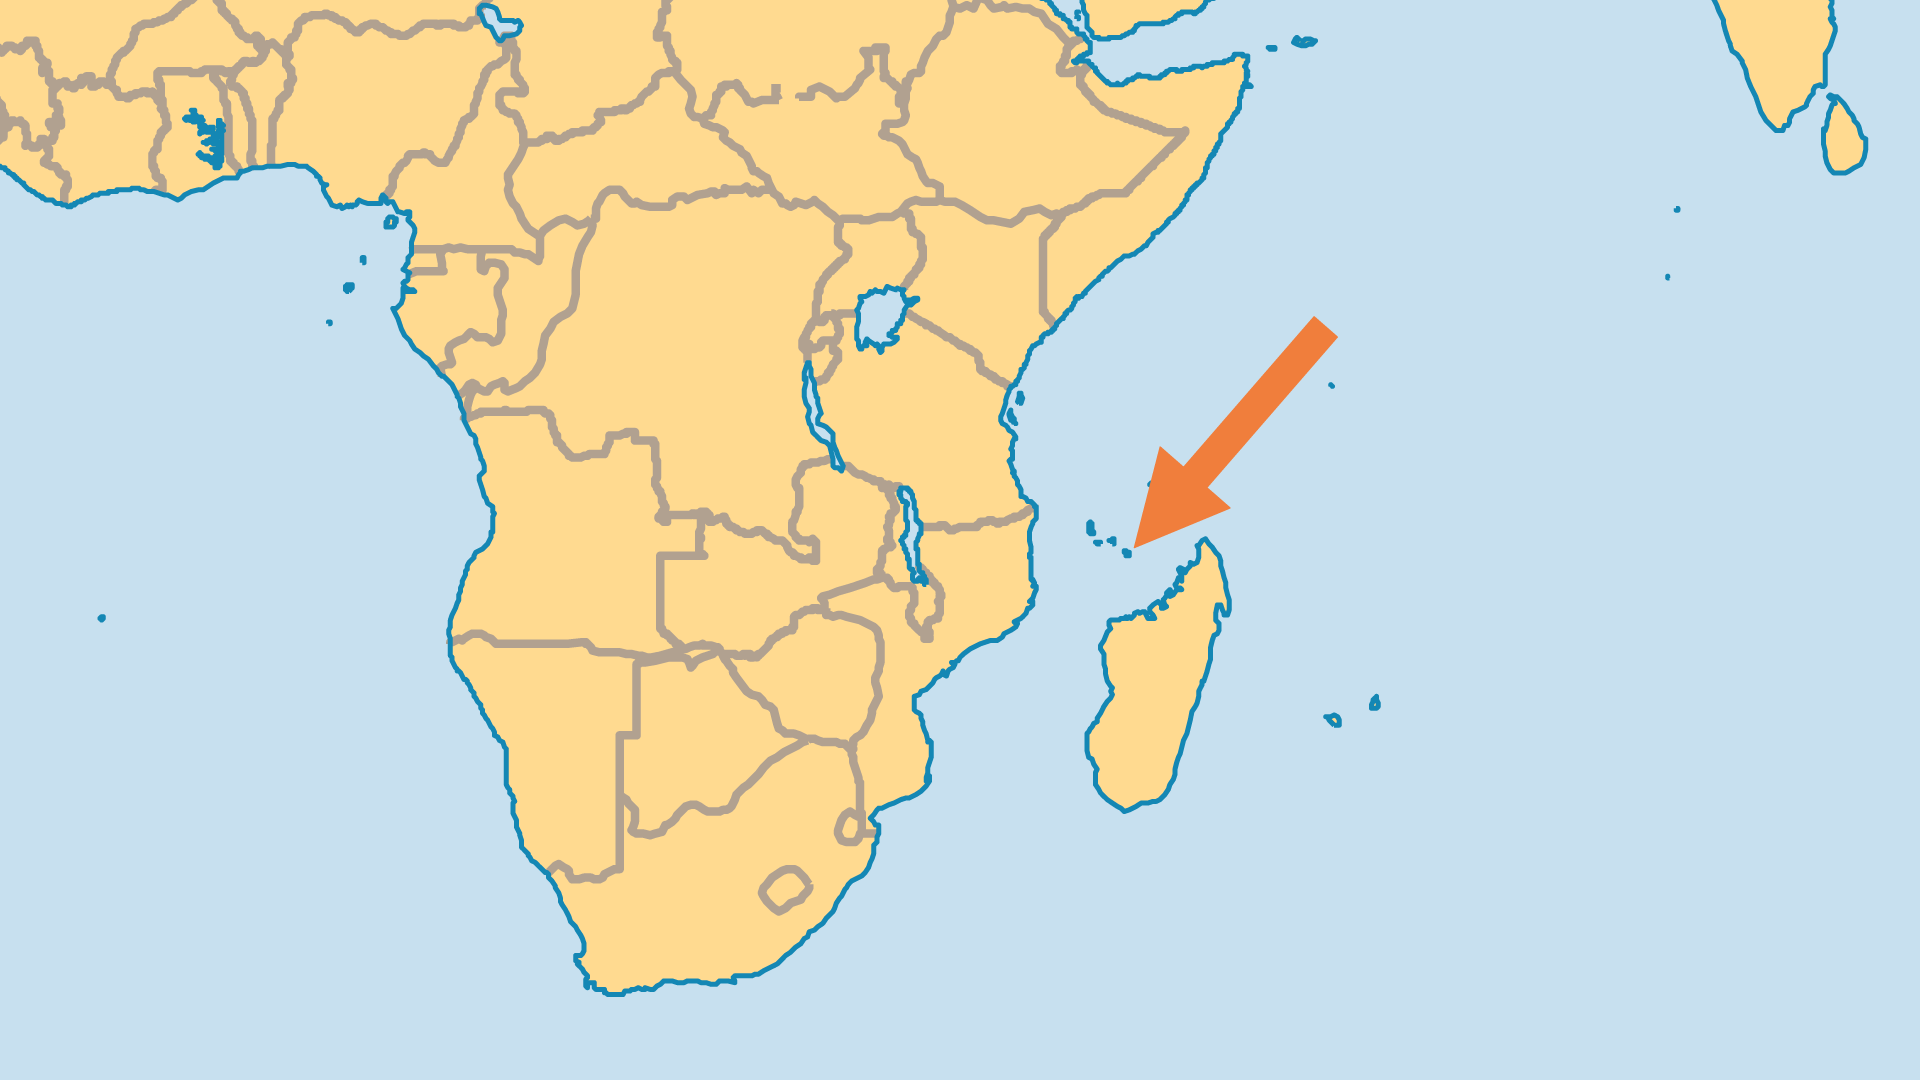 Locator Map for Mayotte